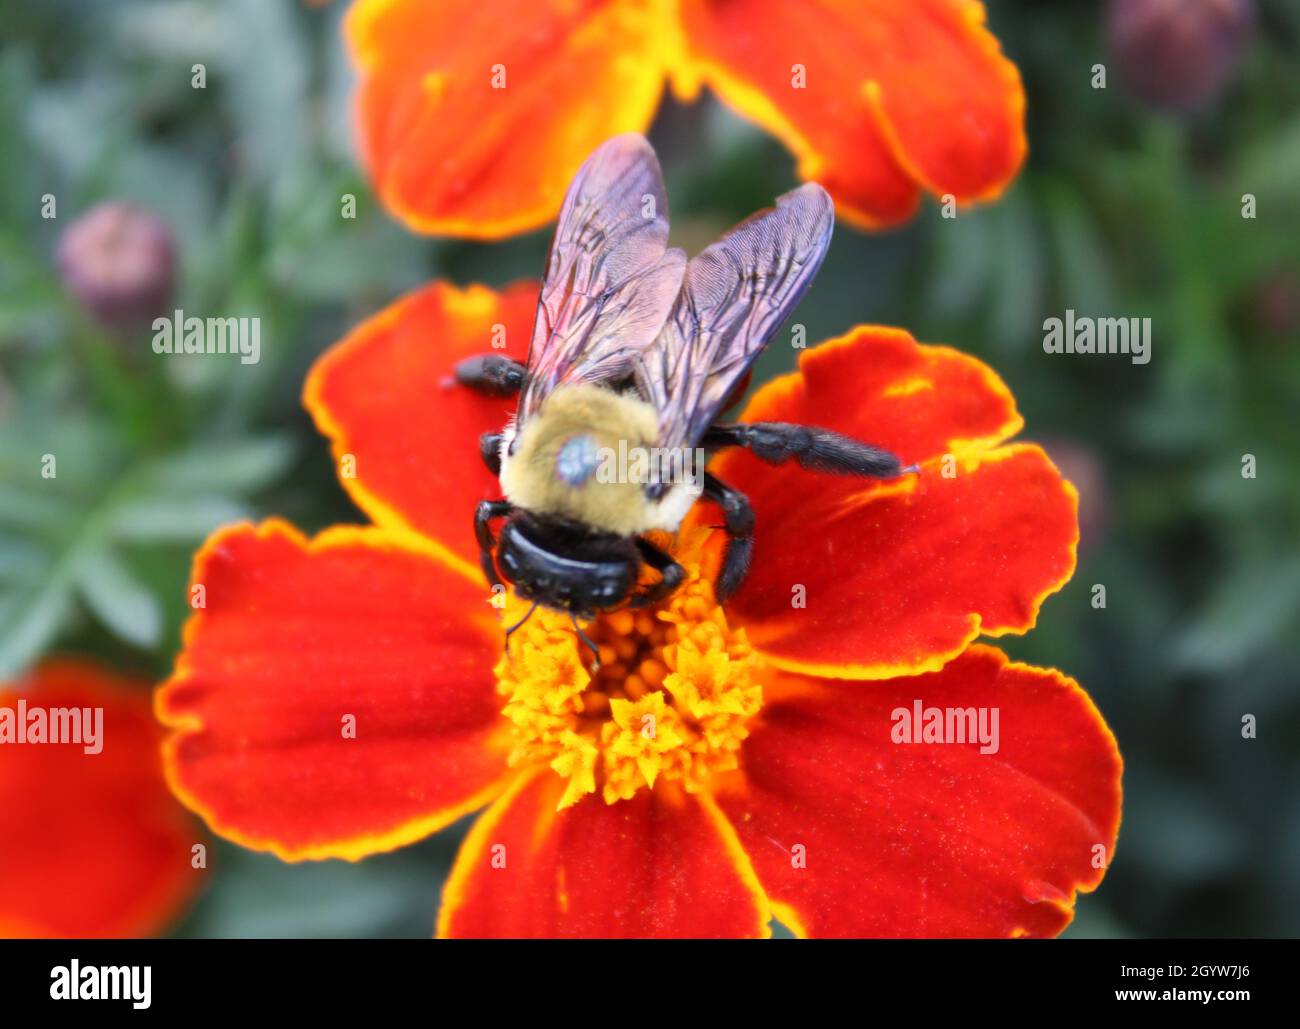 Large bee pollinating a Marigold flower. Stock Photo